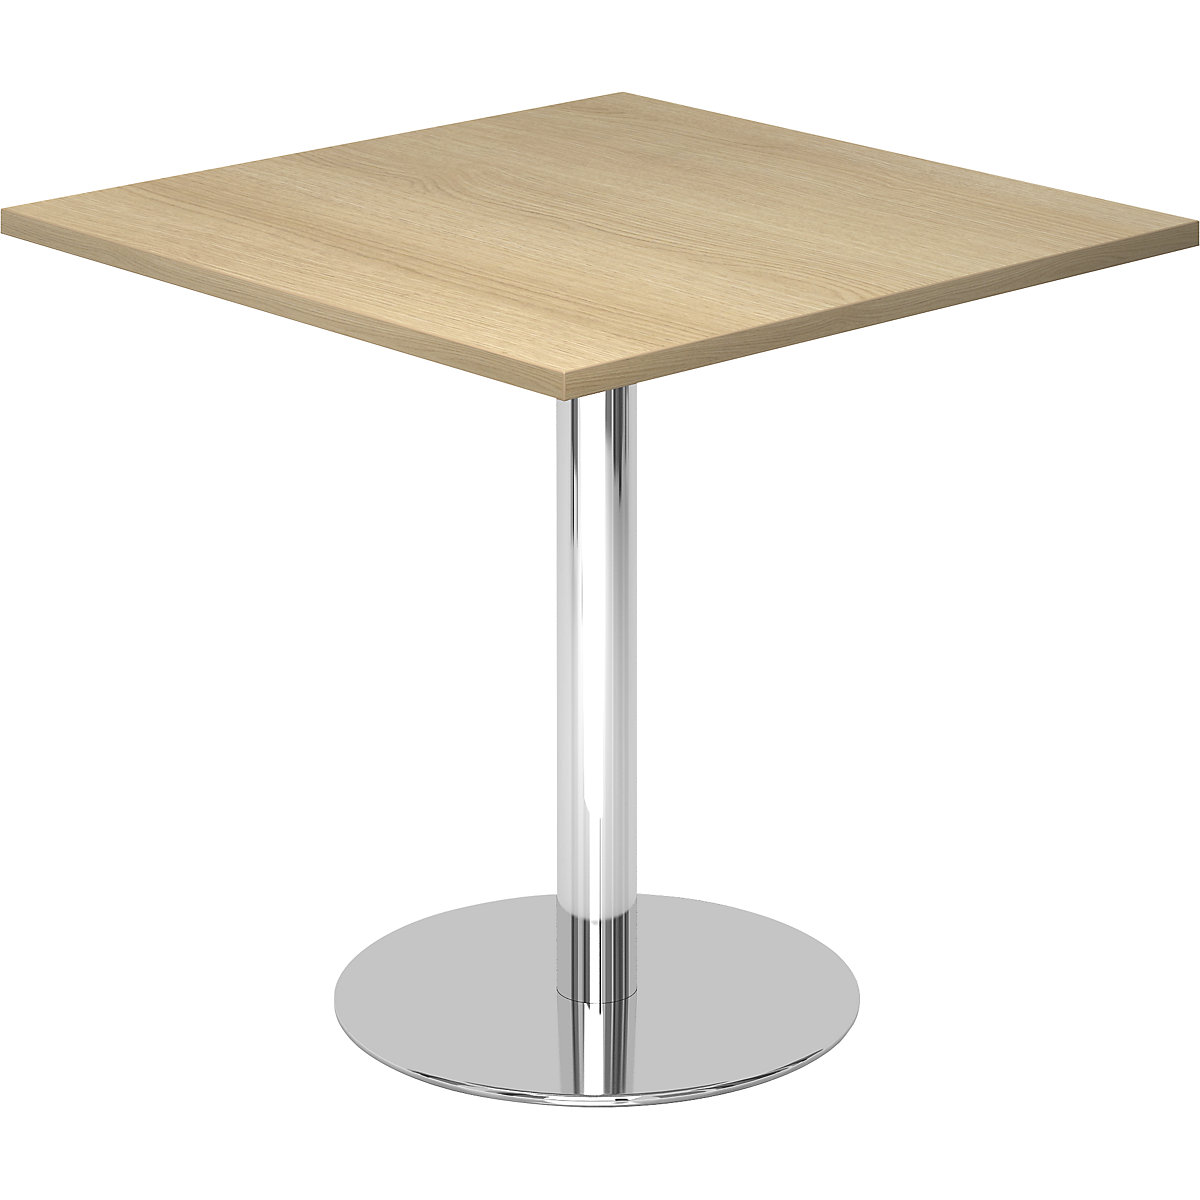 Conference table, LxW 800 x 800 mm, 755 mm high, chrome plated frame, tabletop in oak finish-2